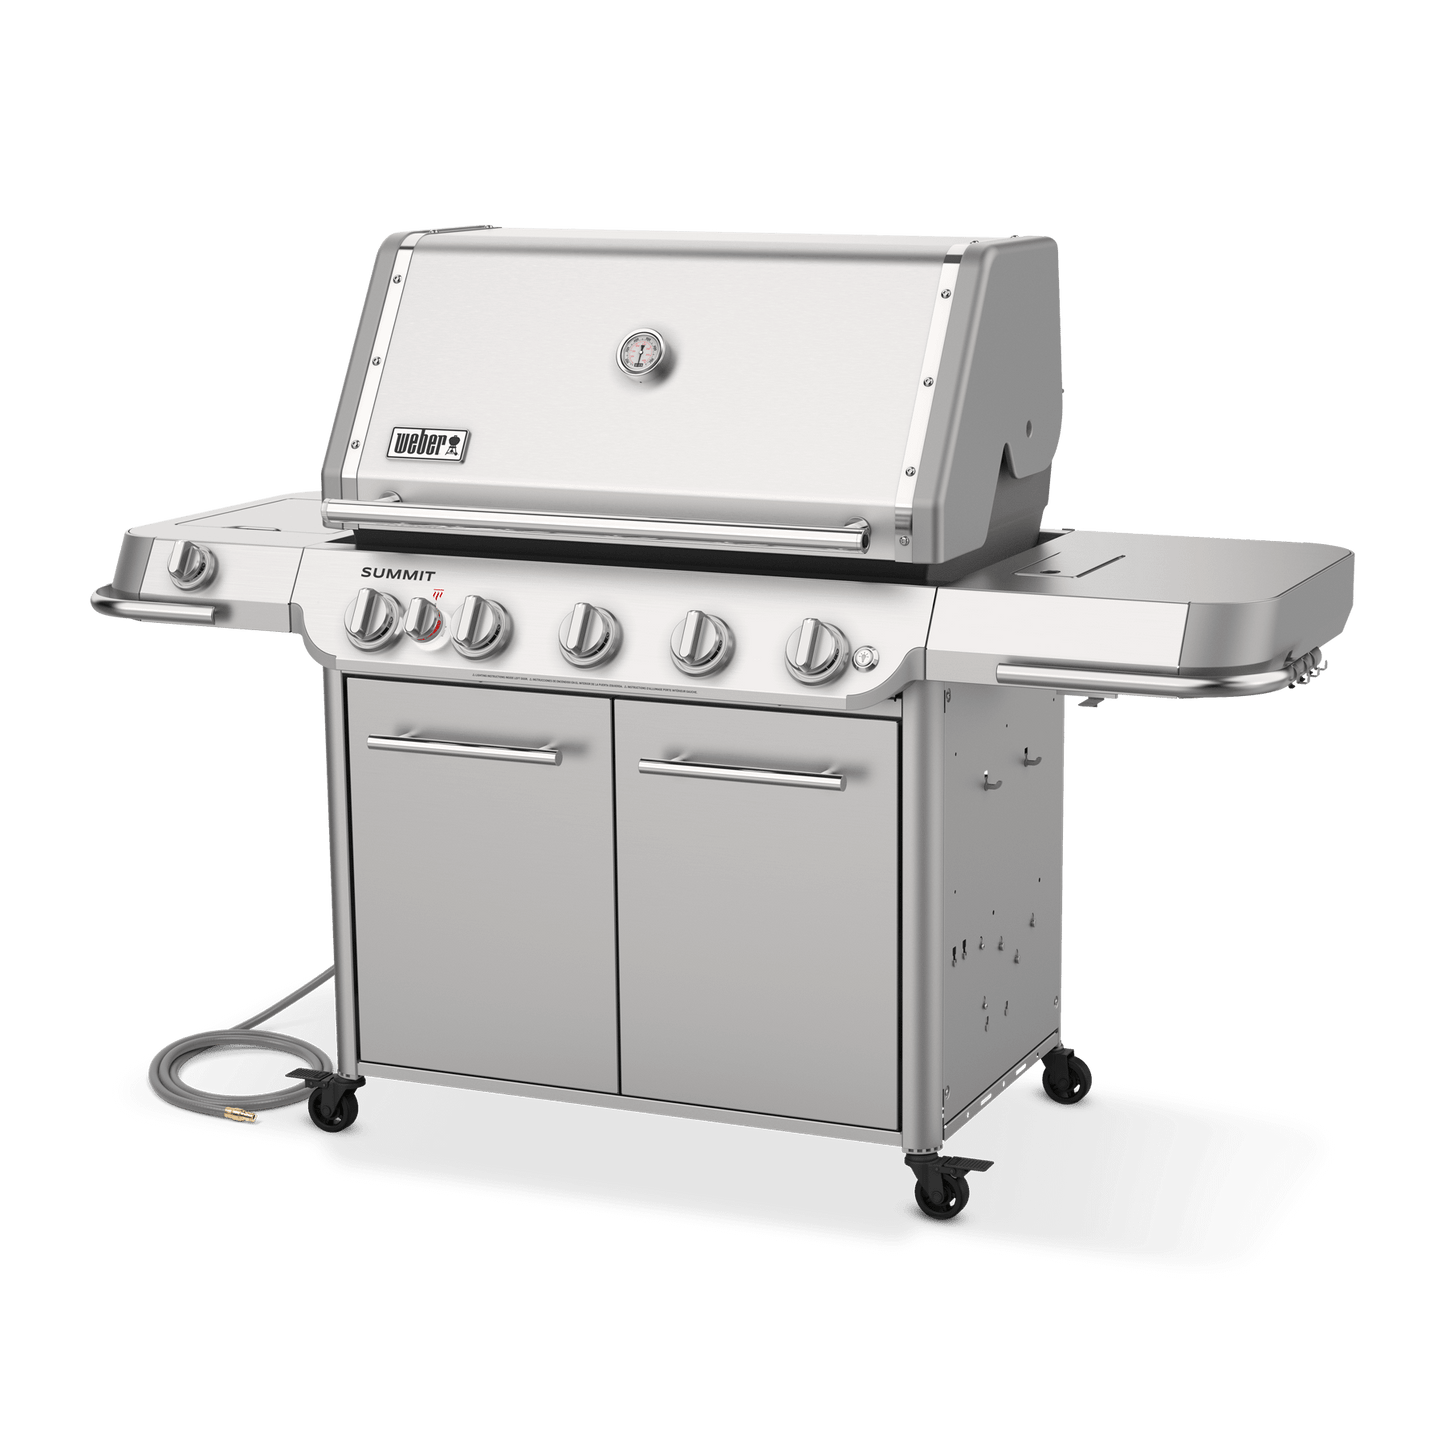 Weber 1500041 Summit® Fs38 S Gas Grill (Natural Gas) - Stainless Steel